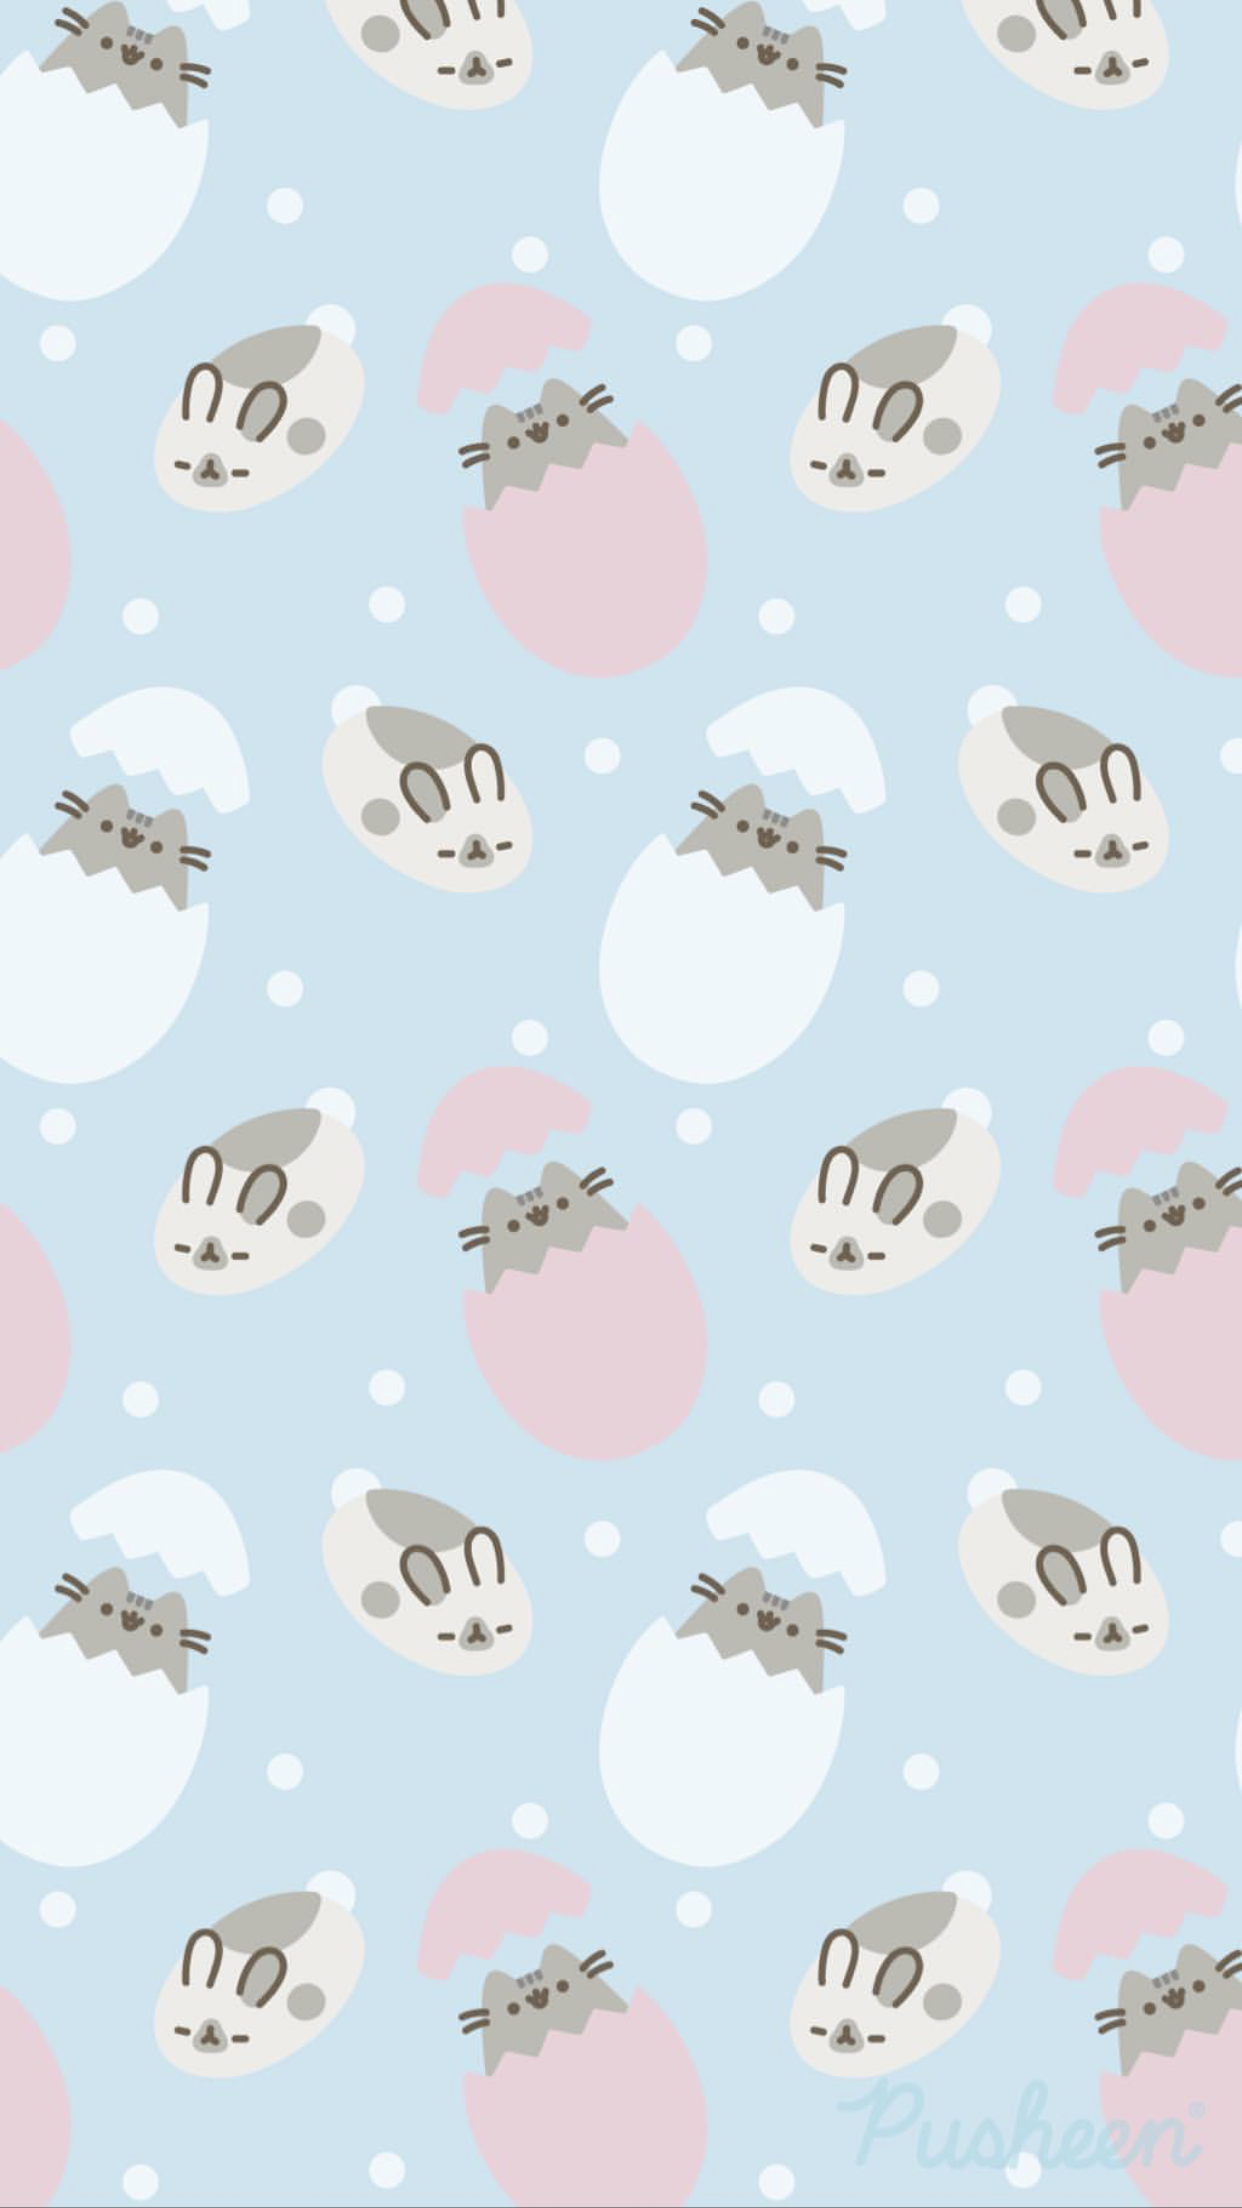 Pusheen the cat floral pastels spring iphone wallpaper Easter bunny. iPhone wallpaper easter, Easter wallpaper, Bunny wallpaper